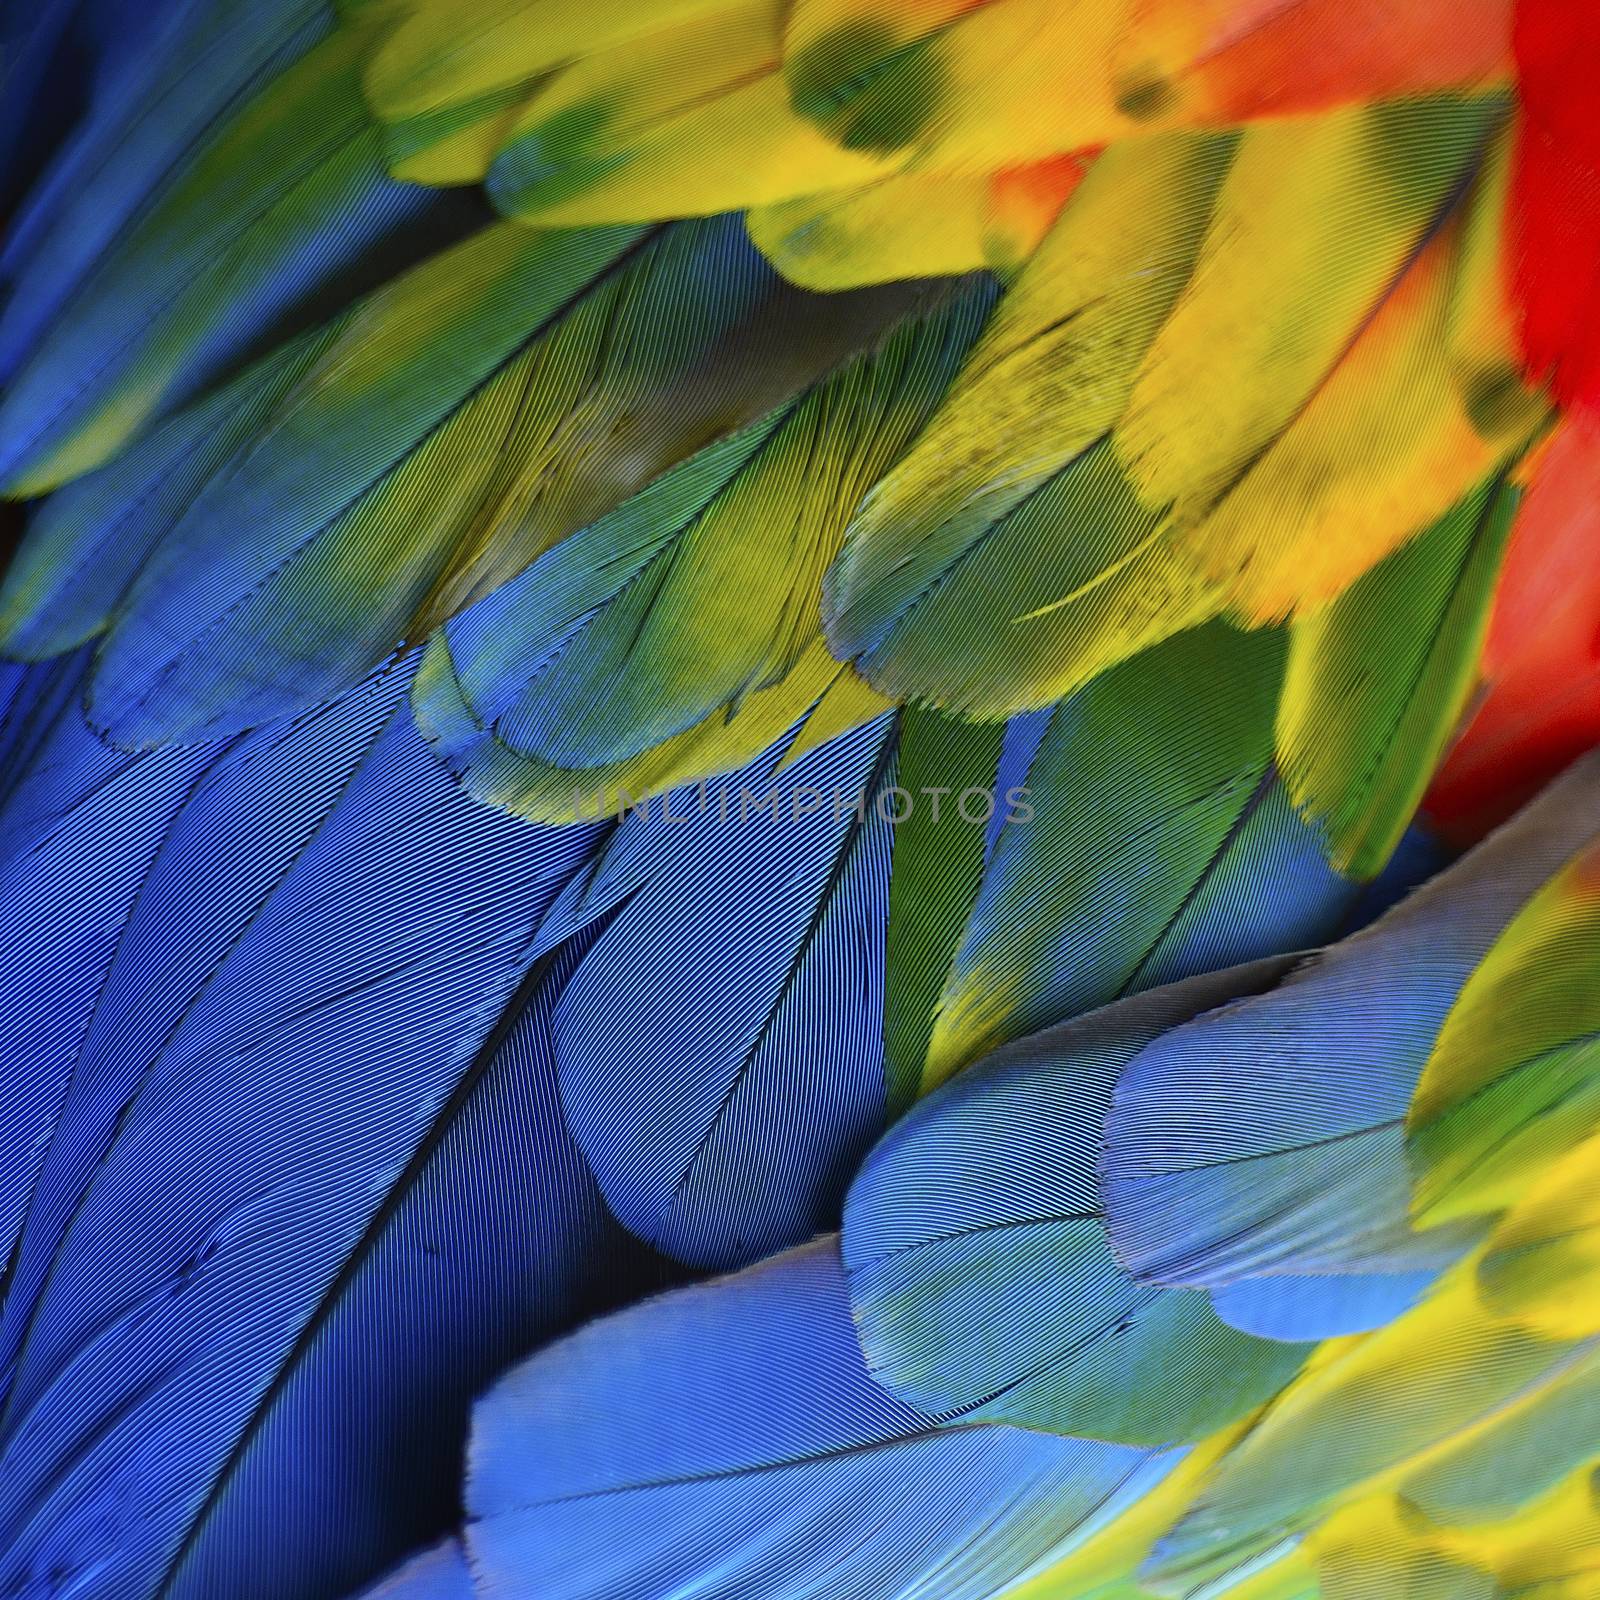 Scarlet Macaw feathers by panuruangjan